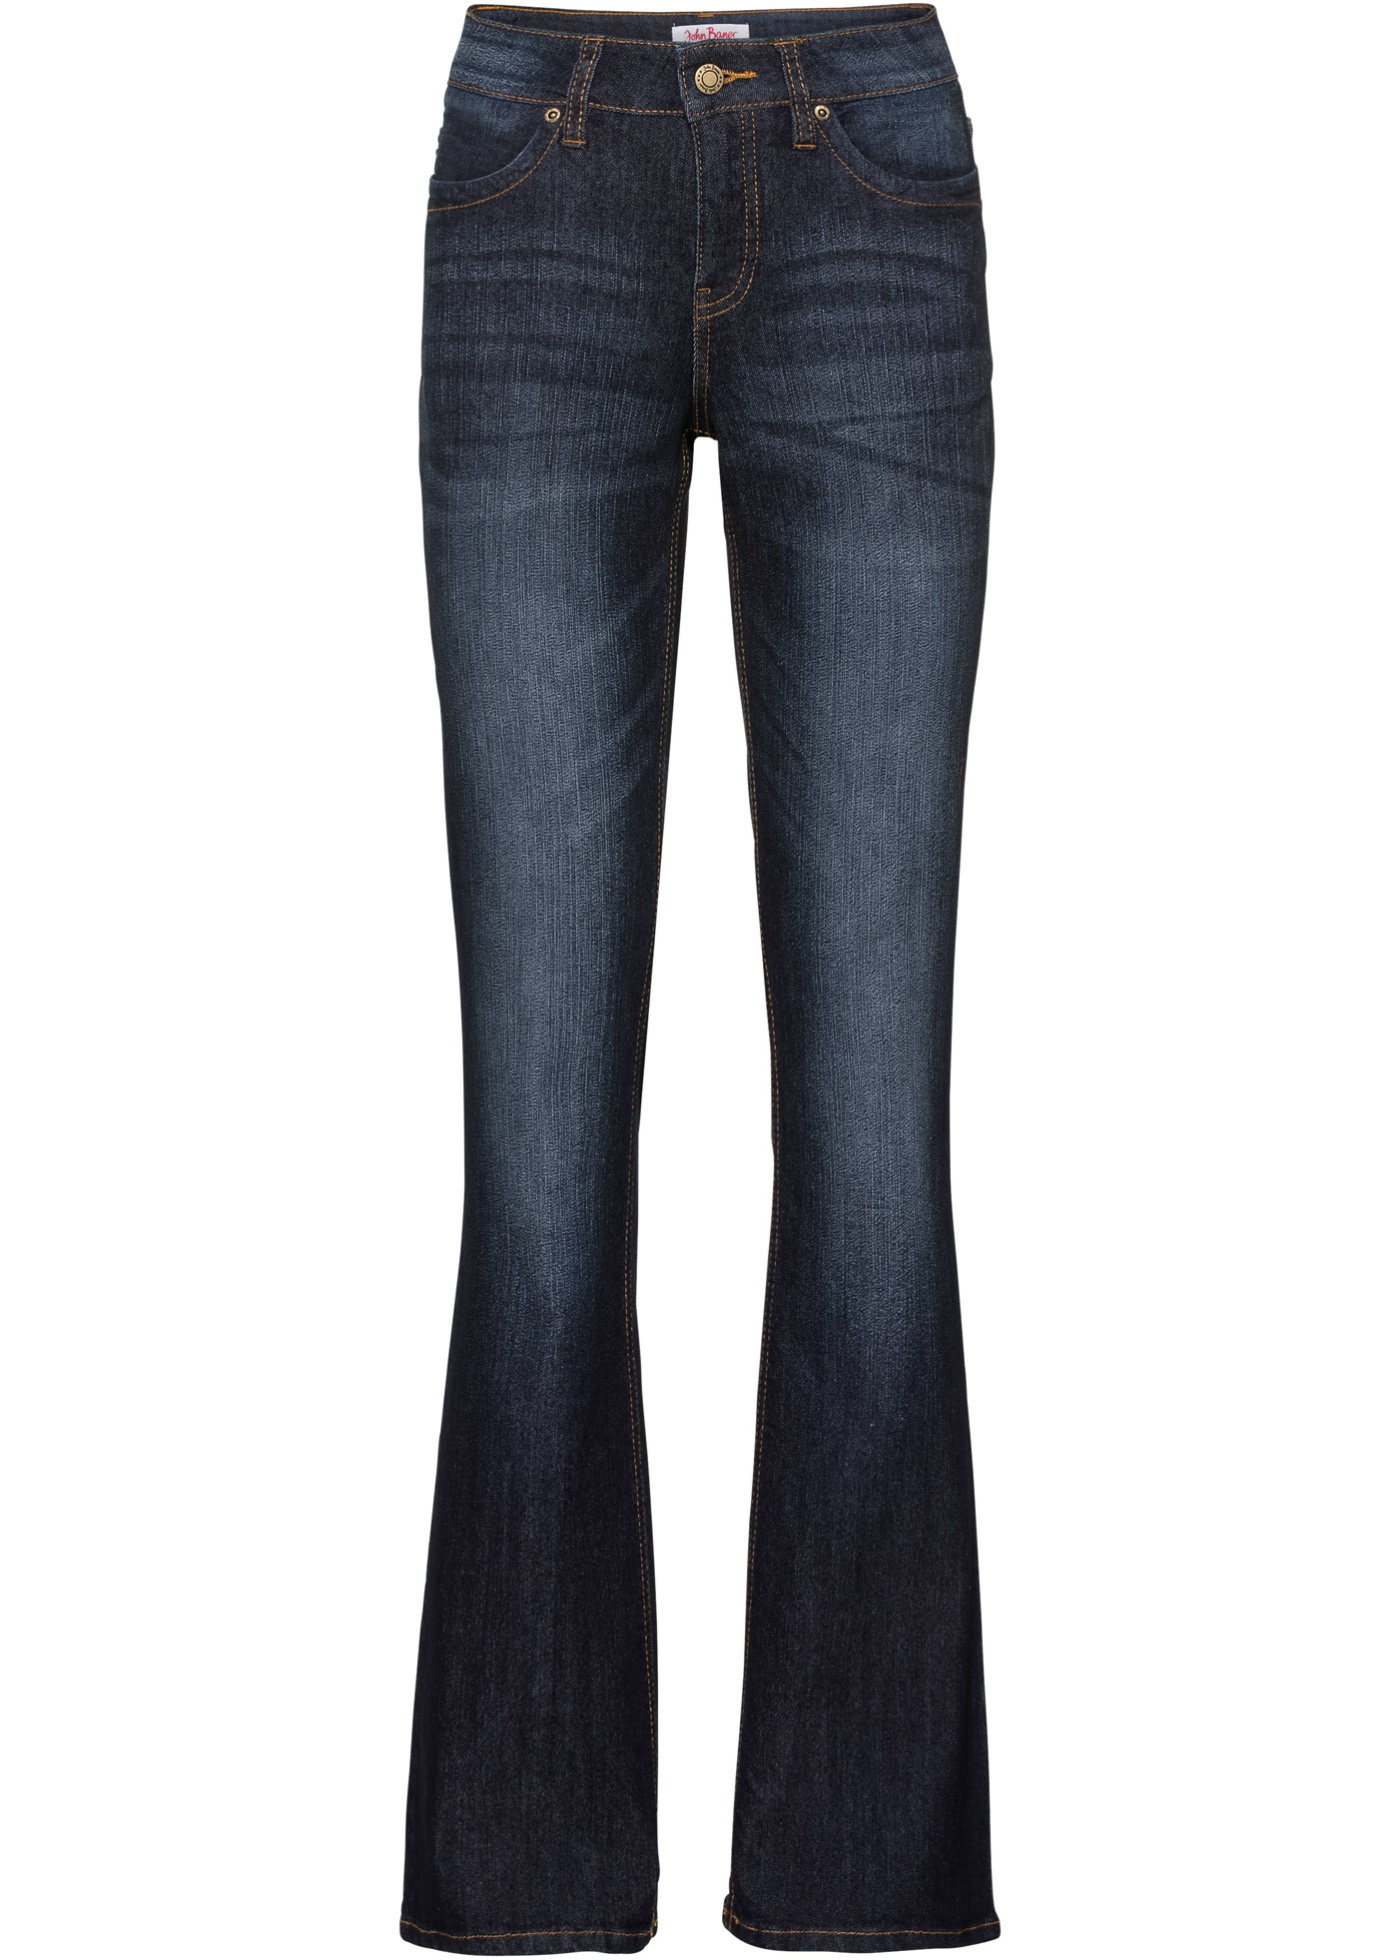 Comfort stretch jeans, bootcut